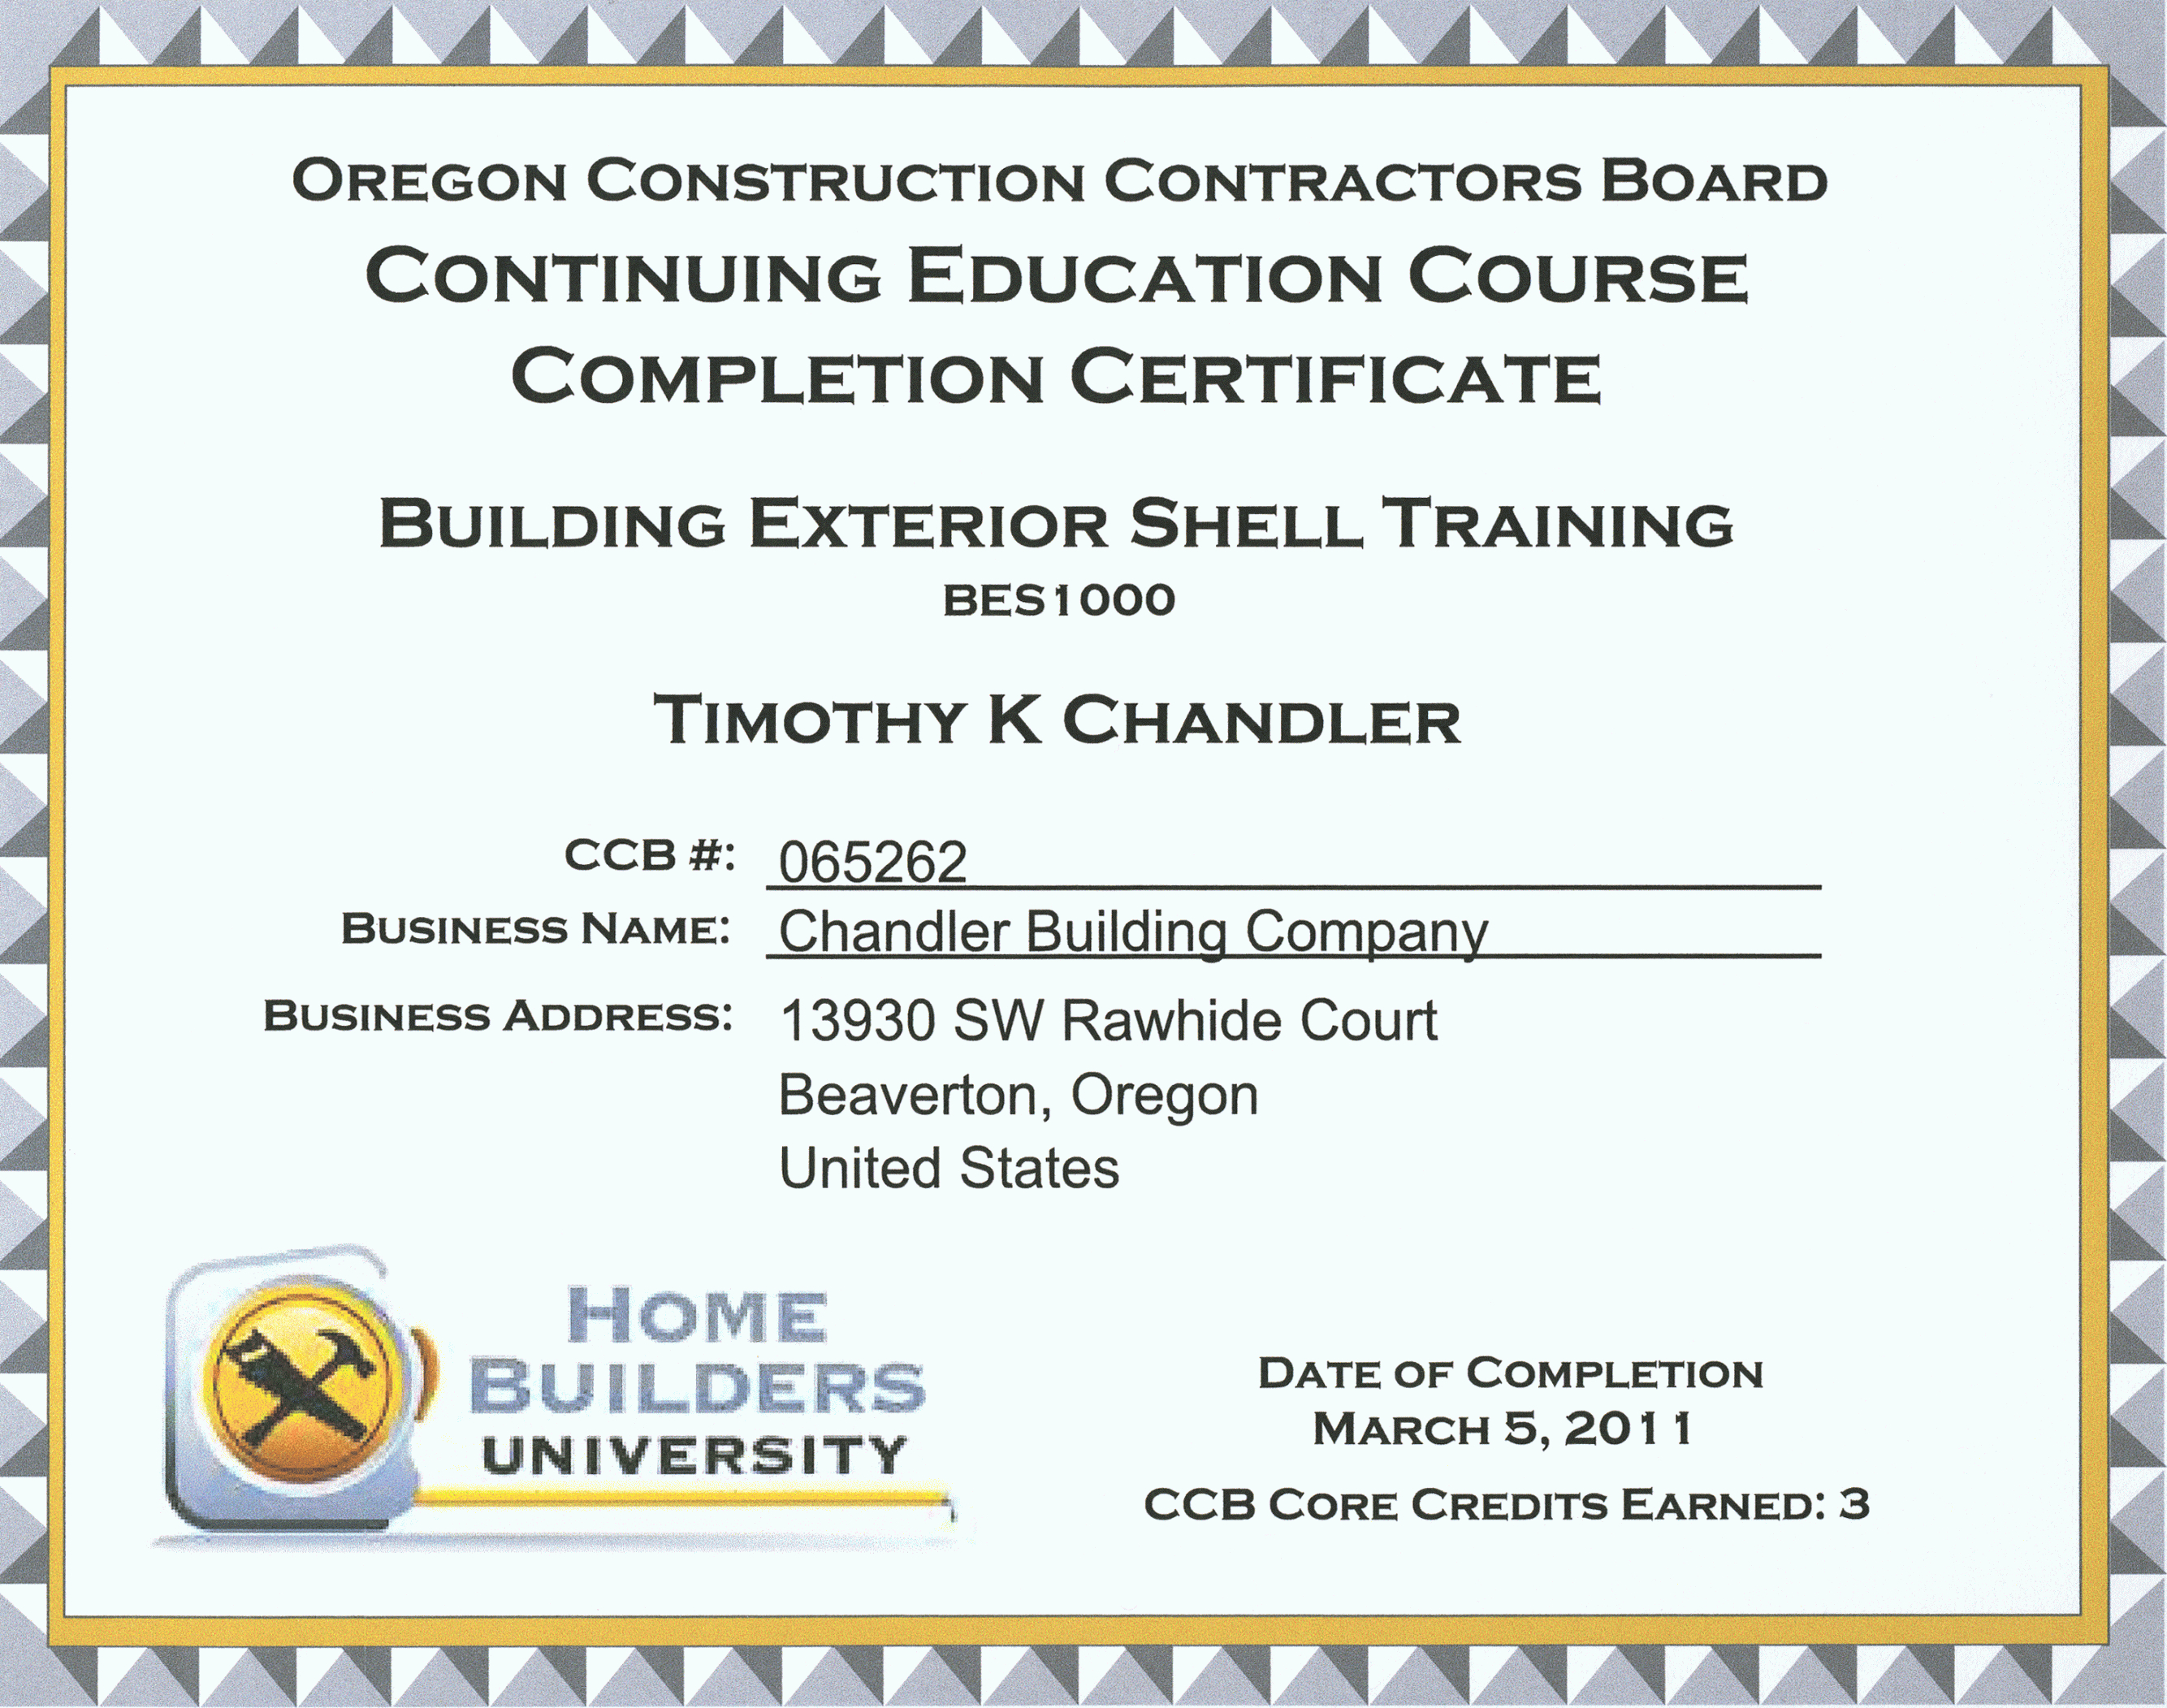 Continuing Education Certificate Template | Emetonlineblog Intended For Continuing Education Certificate Template